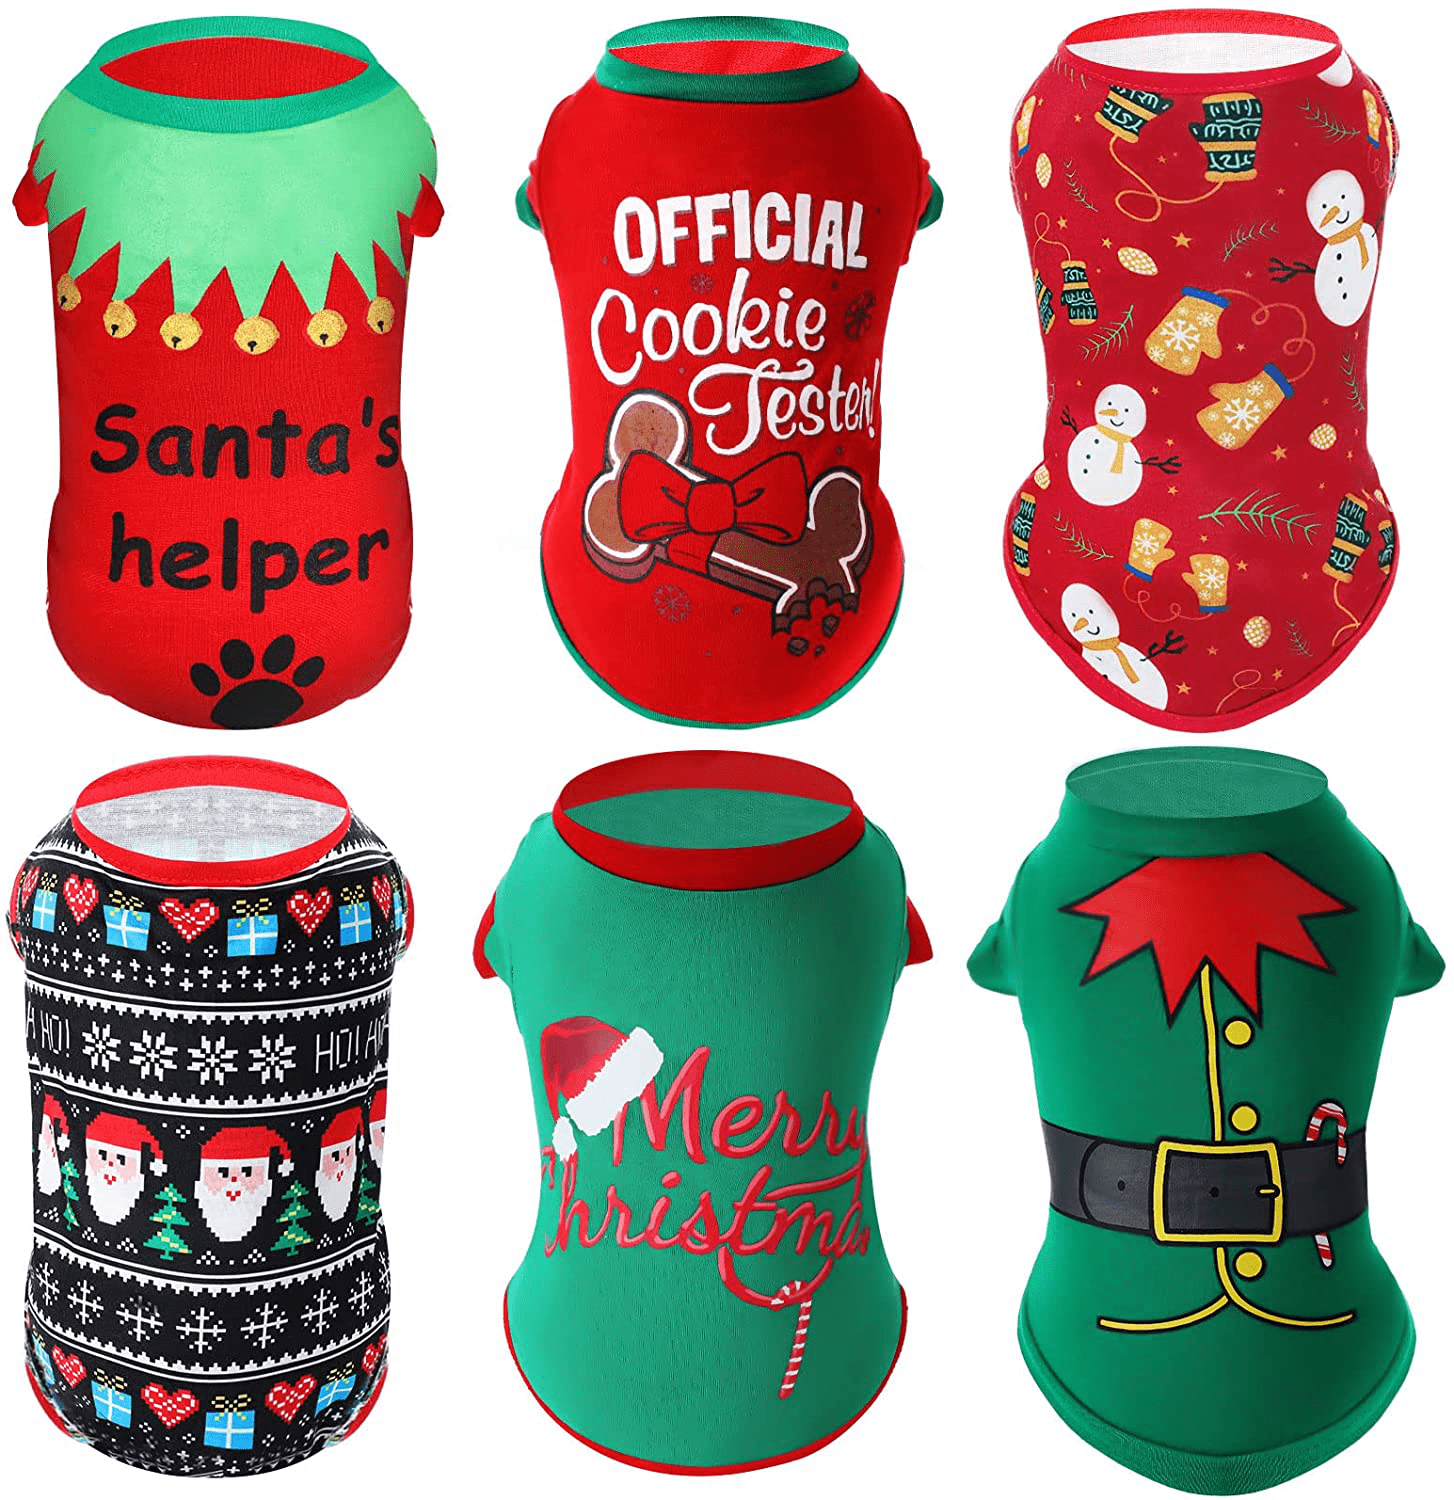 6 Pieces Christmas Dog Shirts Printed Puppy Clothes Soft Breathable Puppy Shirts Christmas Printed Pet T-Shirt Colorful Dog Outfits Puppy Sweatshirt Pullover Clothes for Small Medium Pets